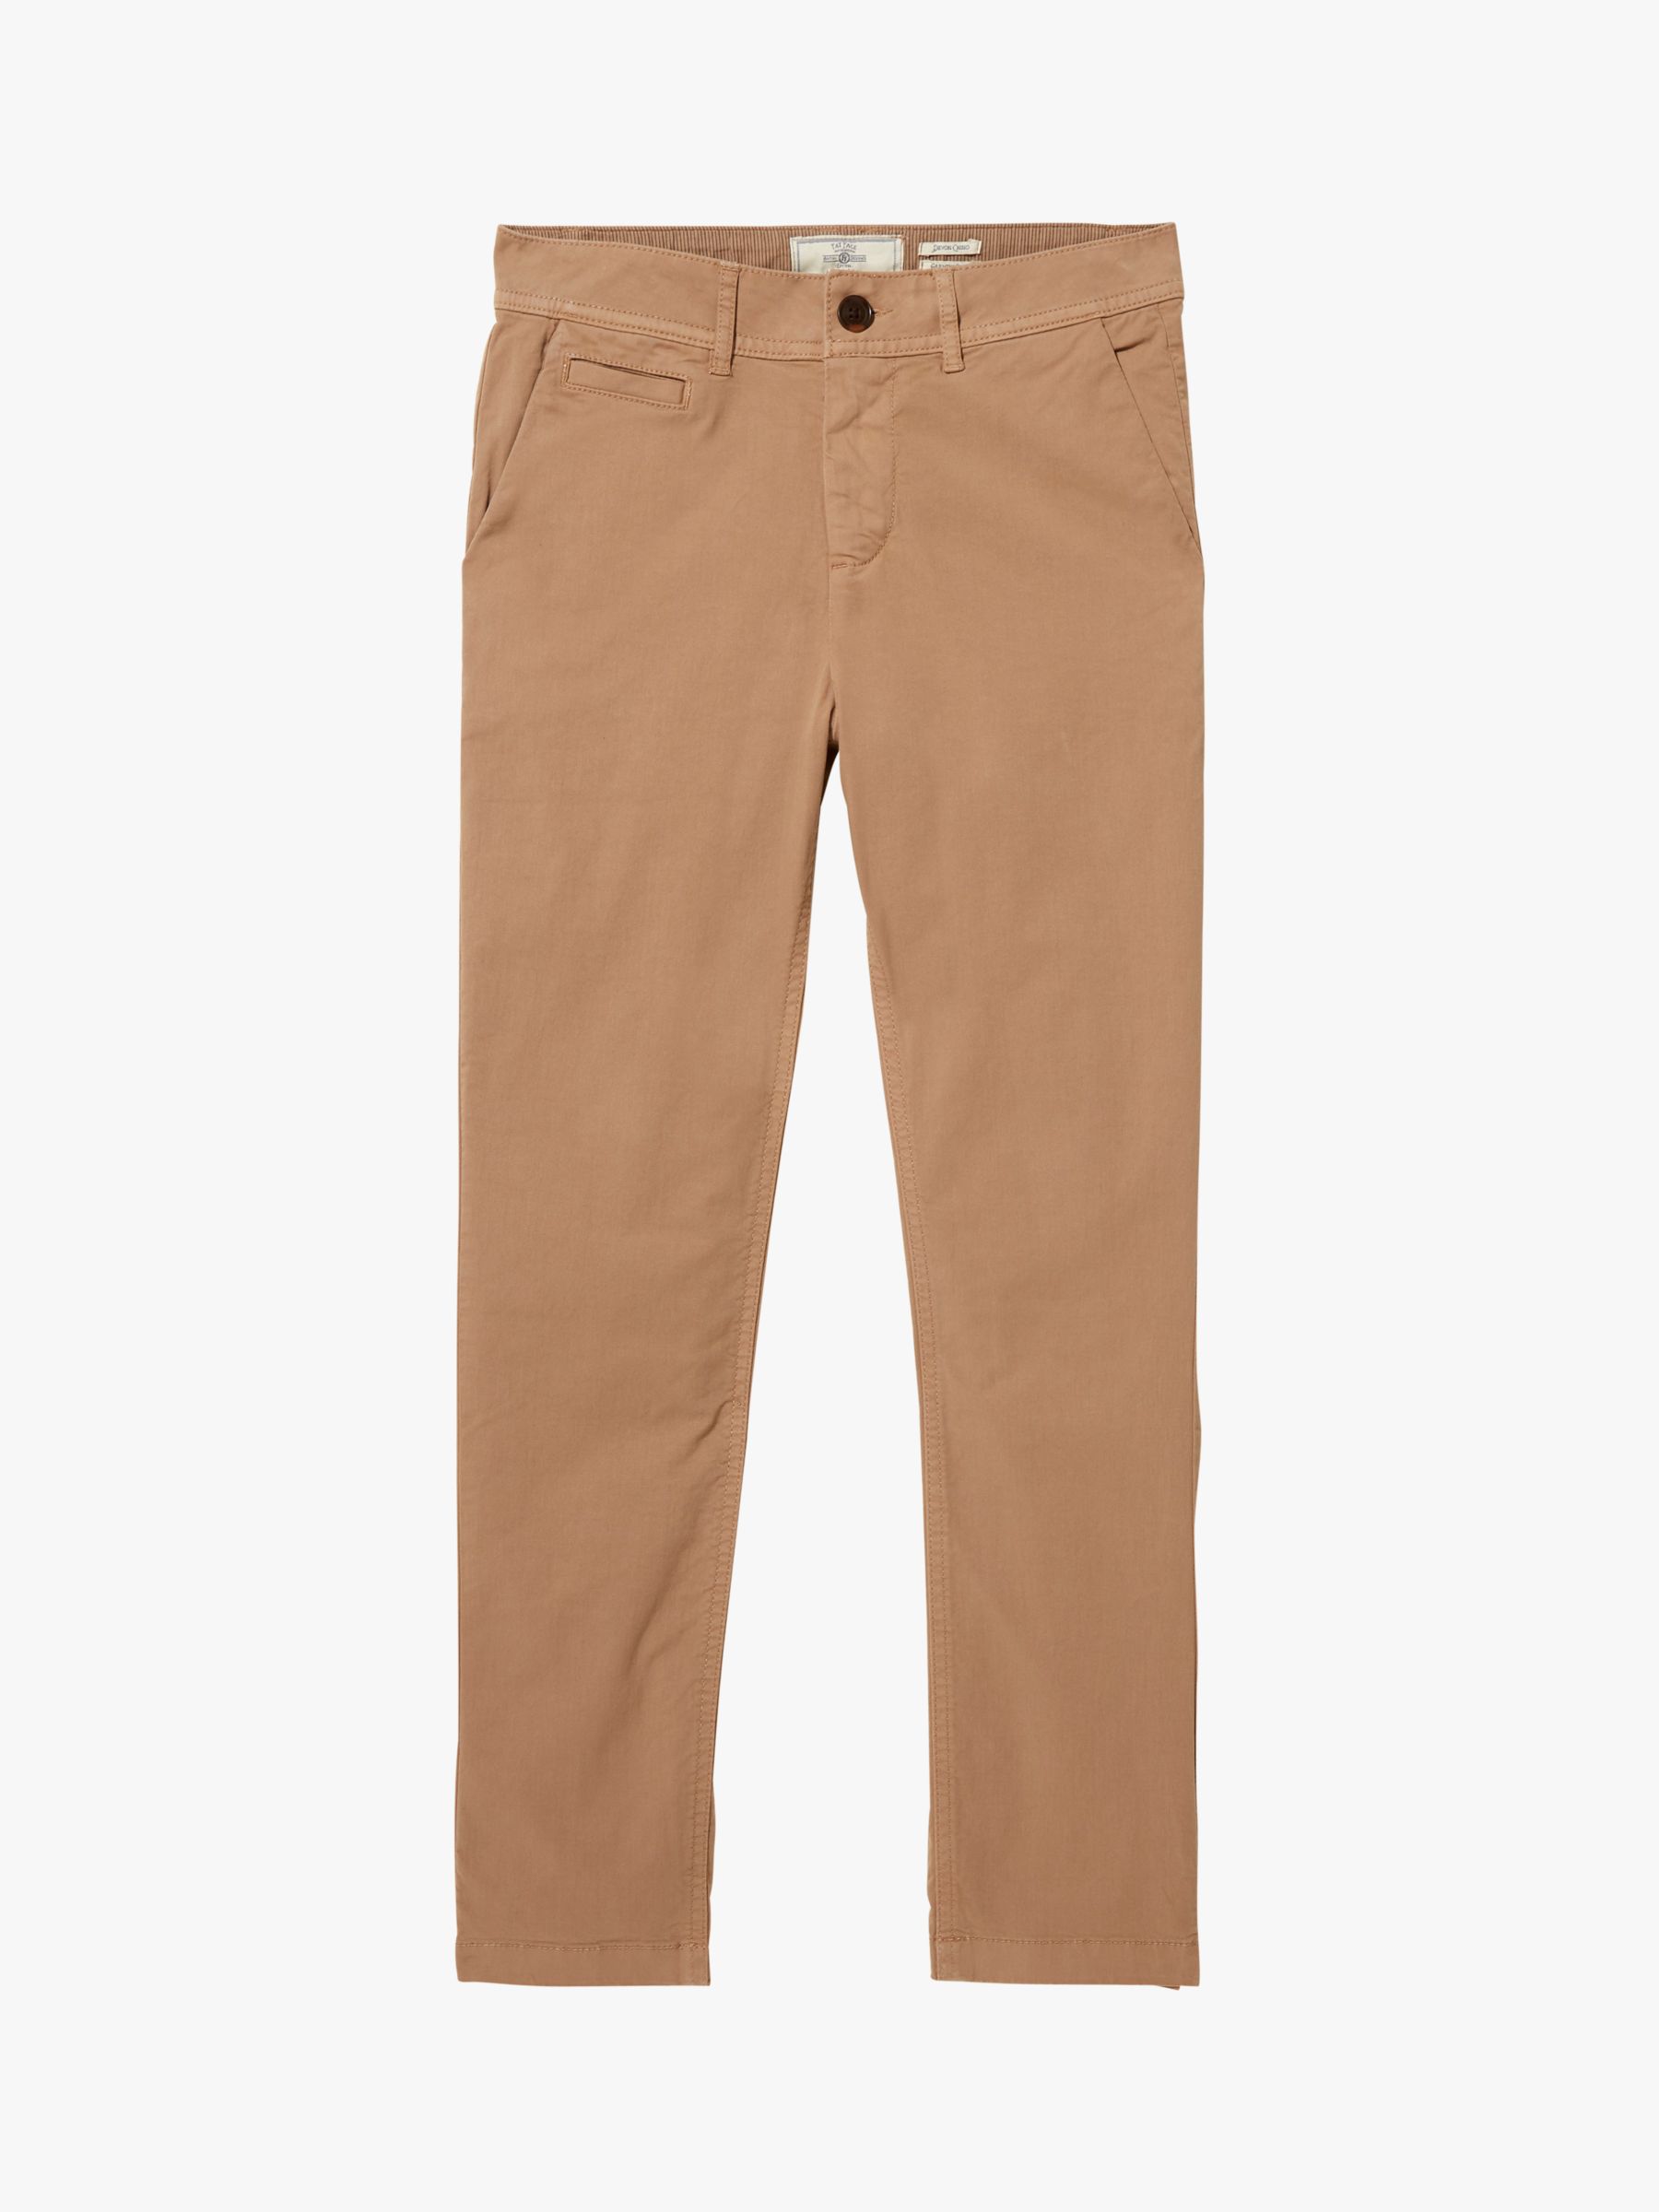 FatFace Devon Chinos, Stone at John Lewis & Partners